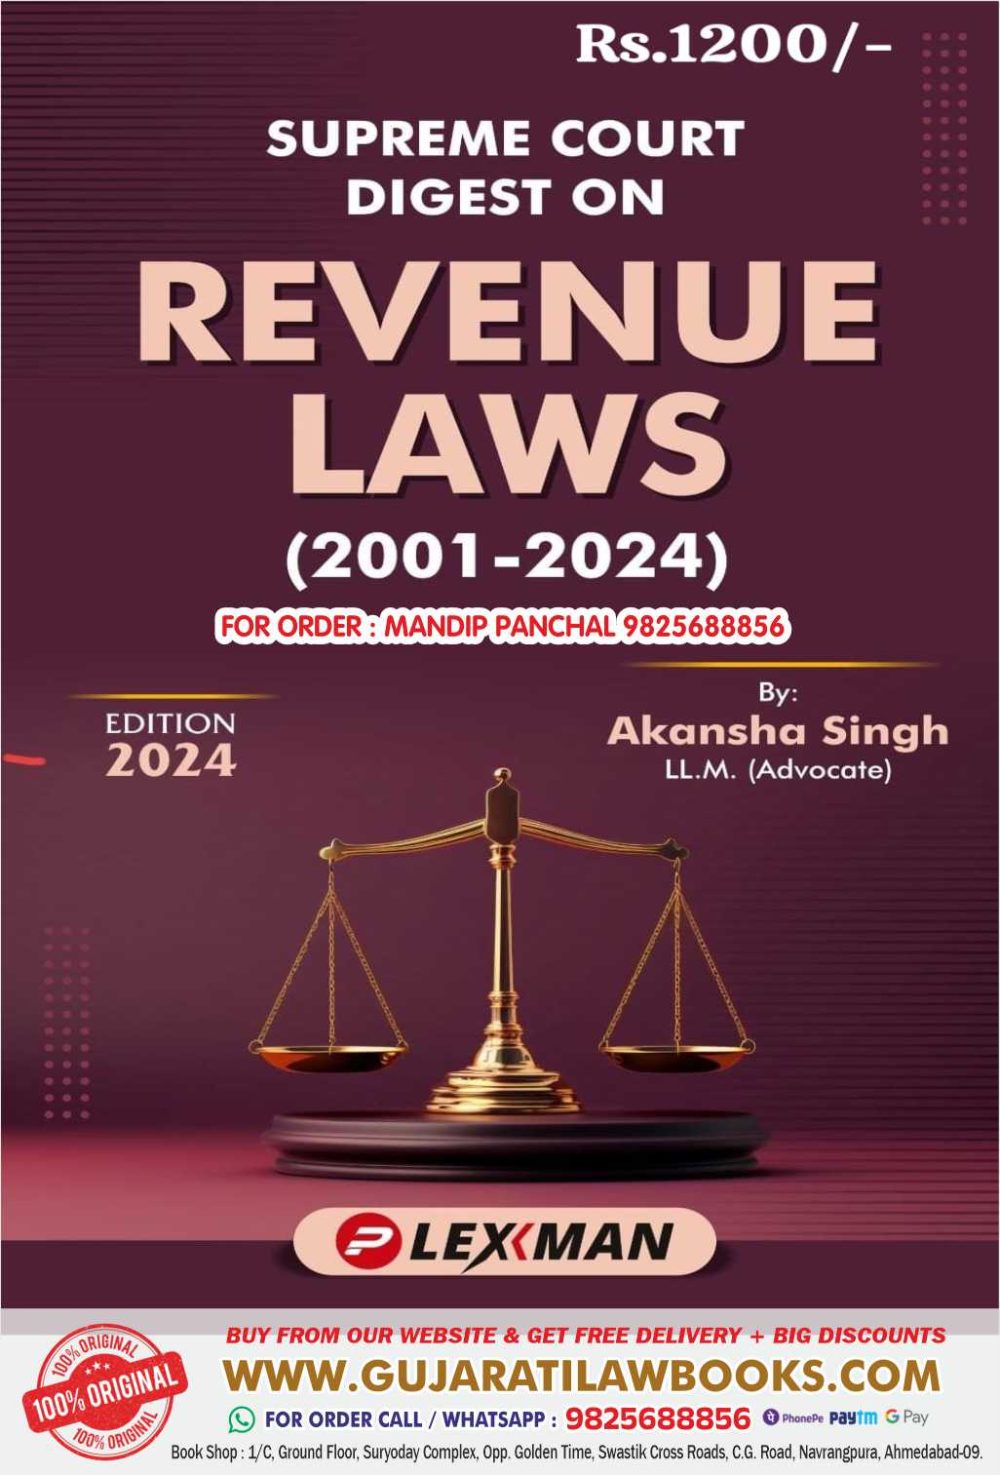 Supreme Court Digest on REVENUE LAWS - in English - Latest 2024 Edition Lexman